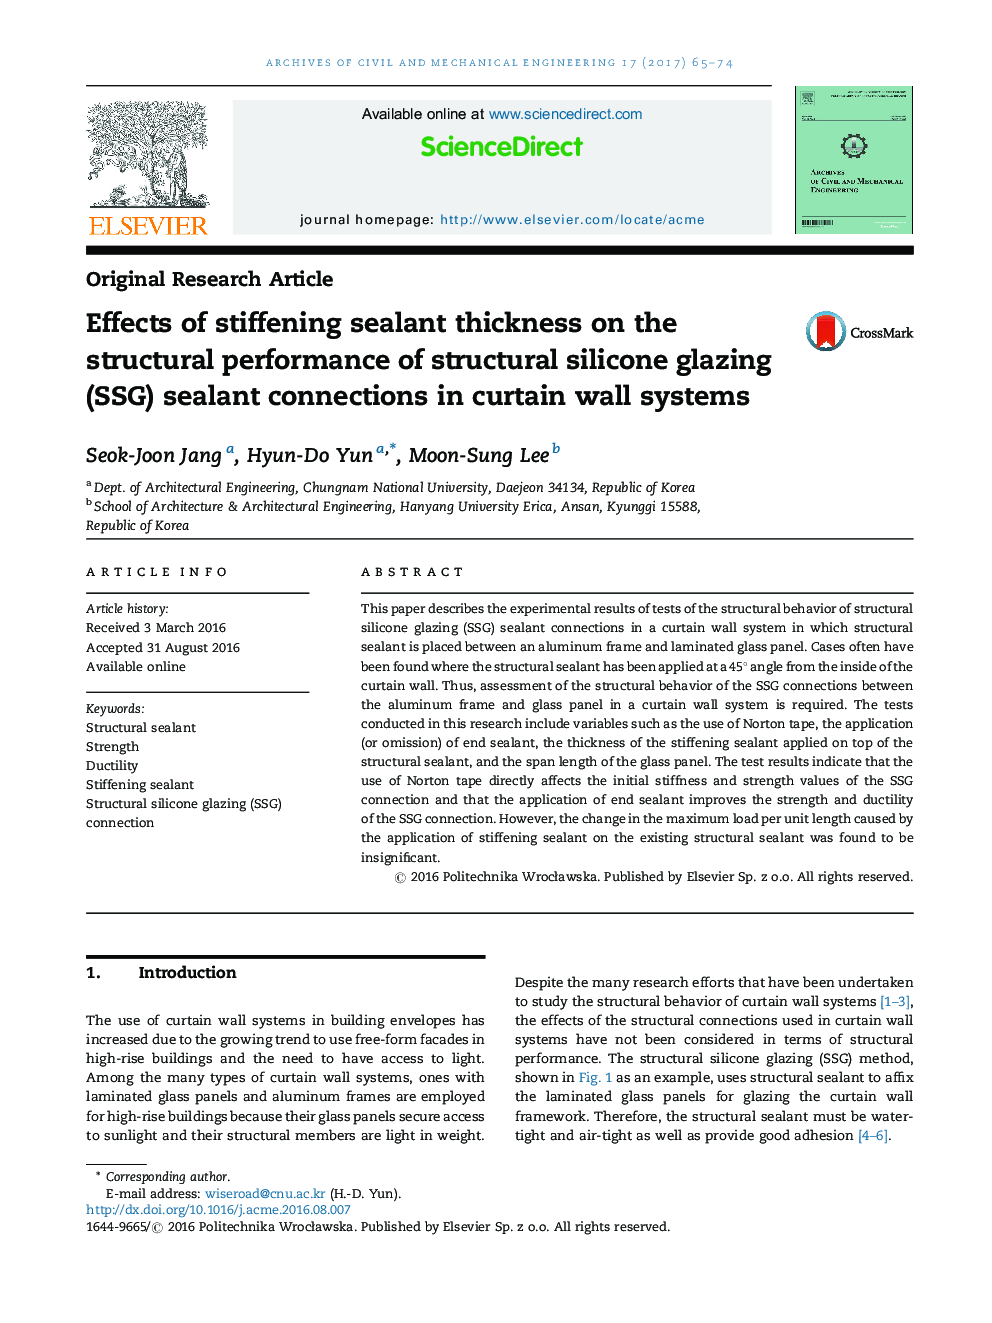 Effects of stiffening sealant thickness on the structural performance of structural silicone glazing (SSG) sealant connections in curtain wall systems